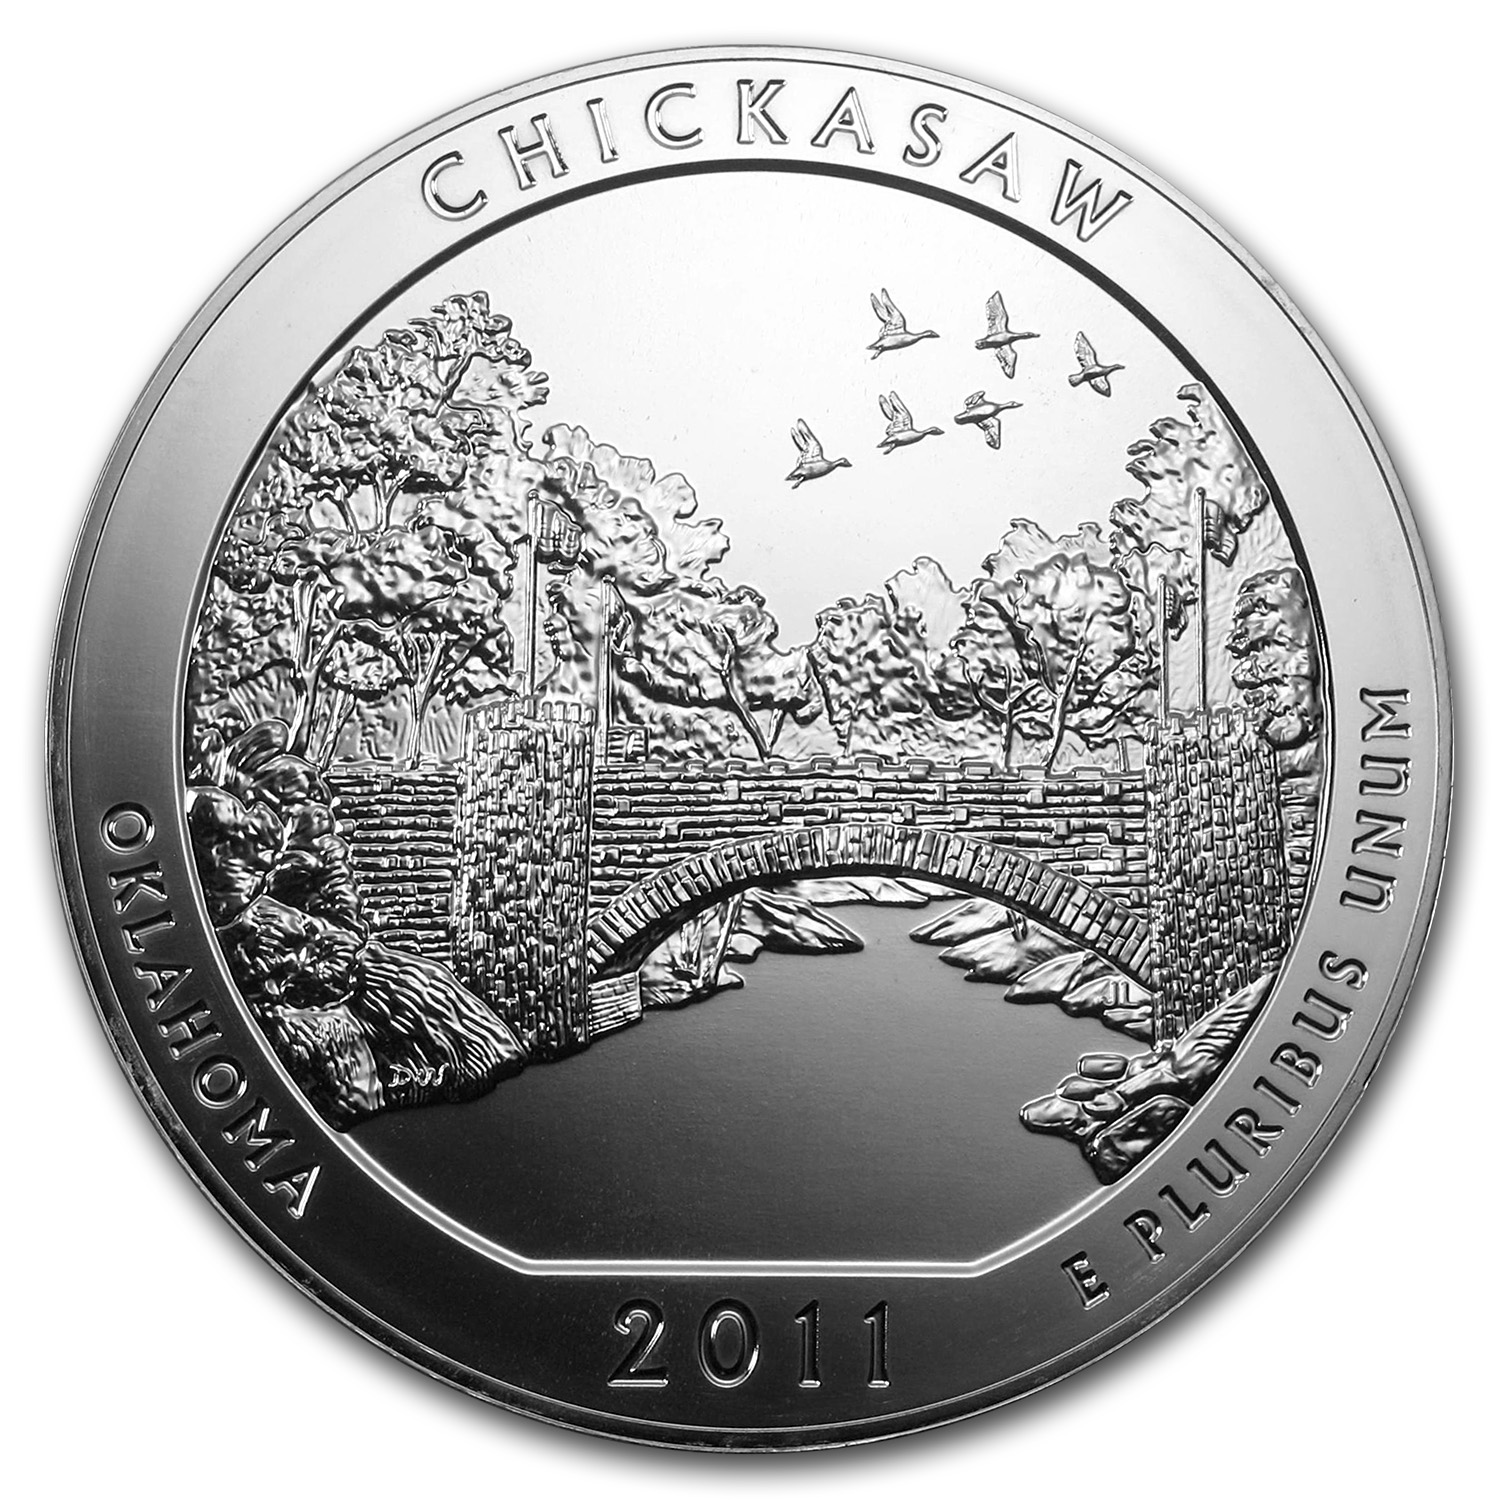 Silver Proof 2011 Chickasaw OK S America the Beautiful Quarter